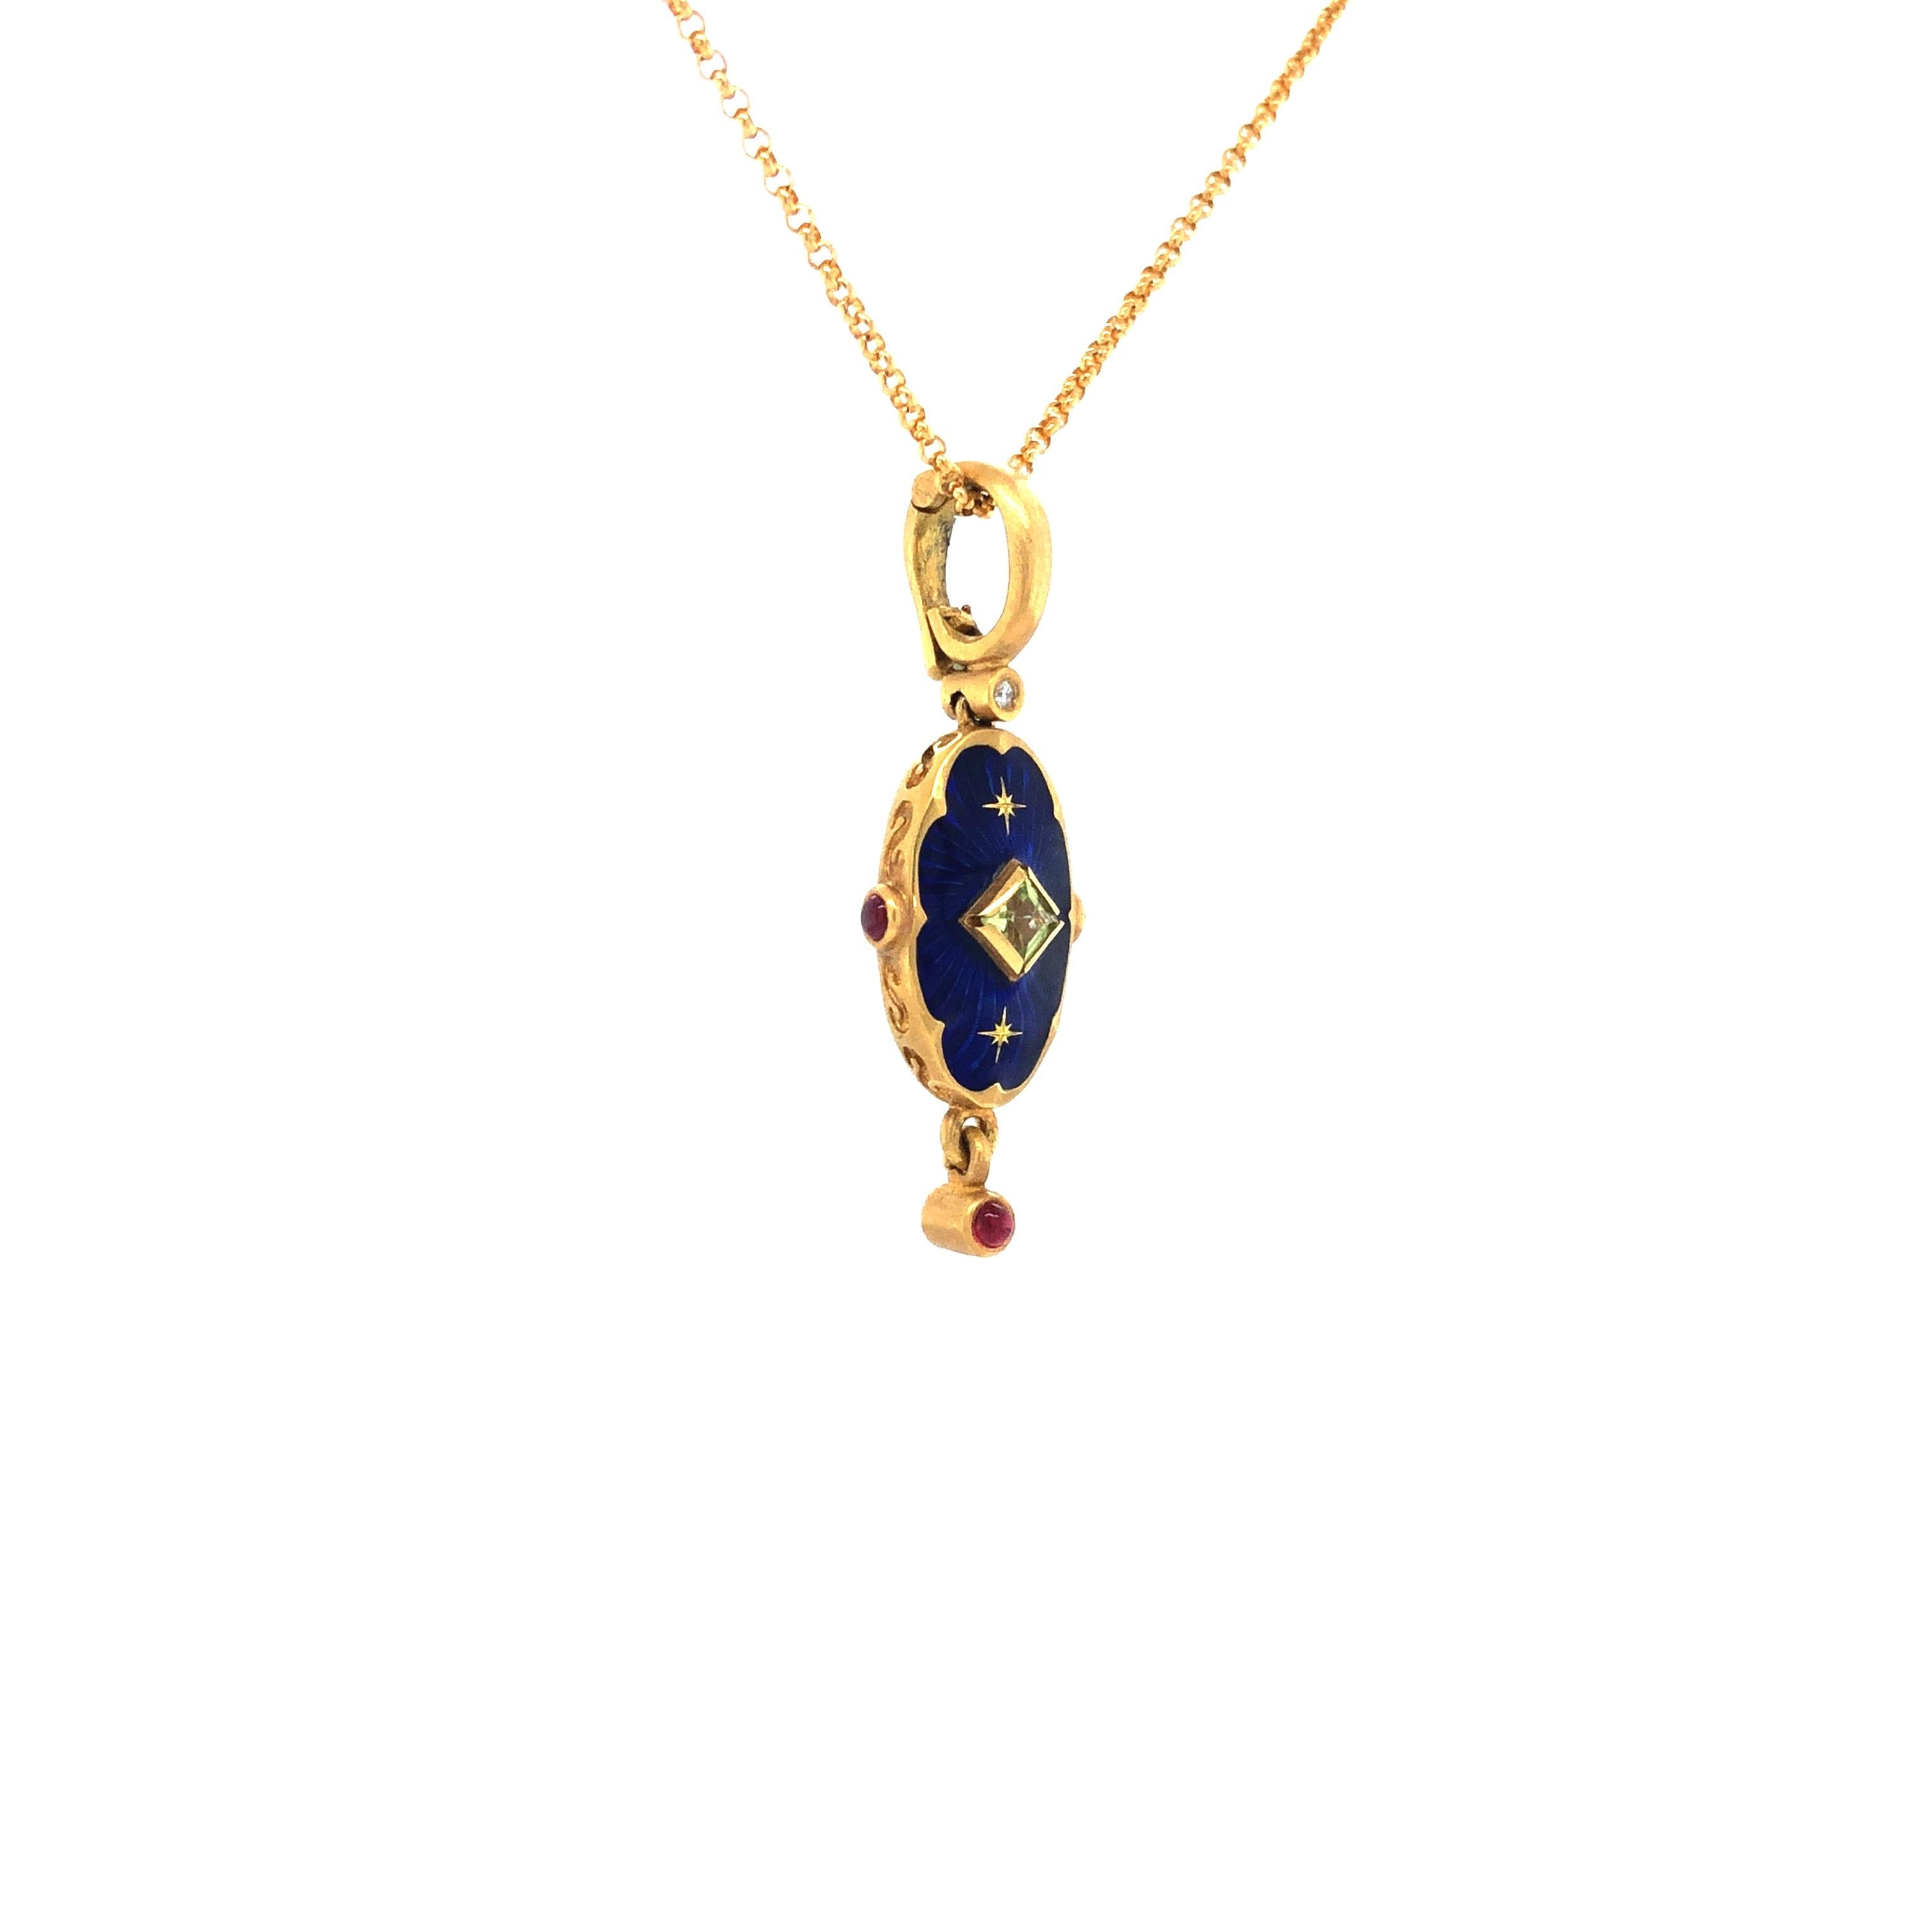 Victor Mayer oval pendant 18k yellow gold, blue Guilloche vitreous enamel, 1 Peridot, 3 Rubies, 2 Gold Star Paillons 

About the creator Victor Mayer
Victor Mayer is internationally renowned for elegant timeless designs and unrivalled expertise in